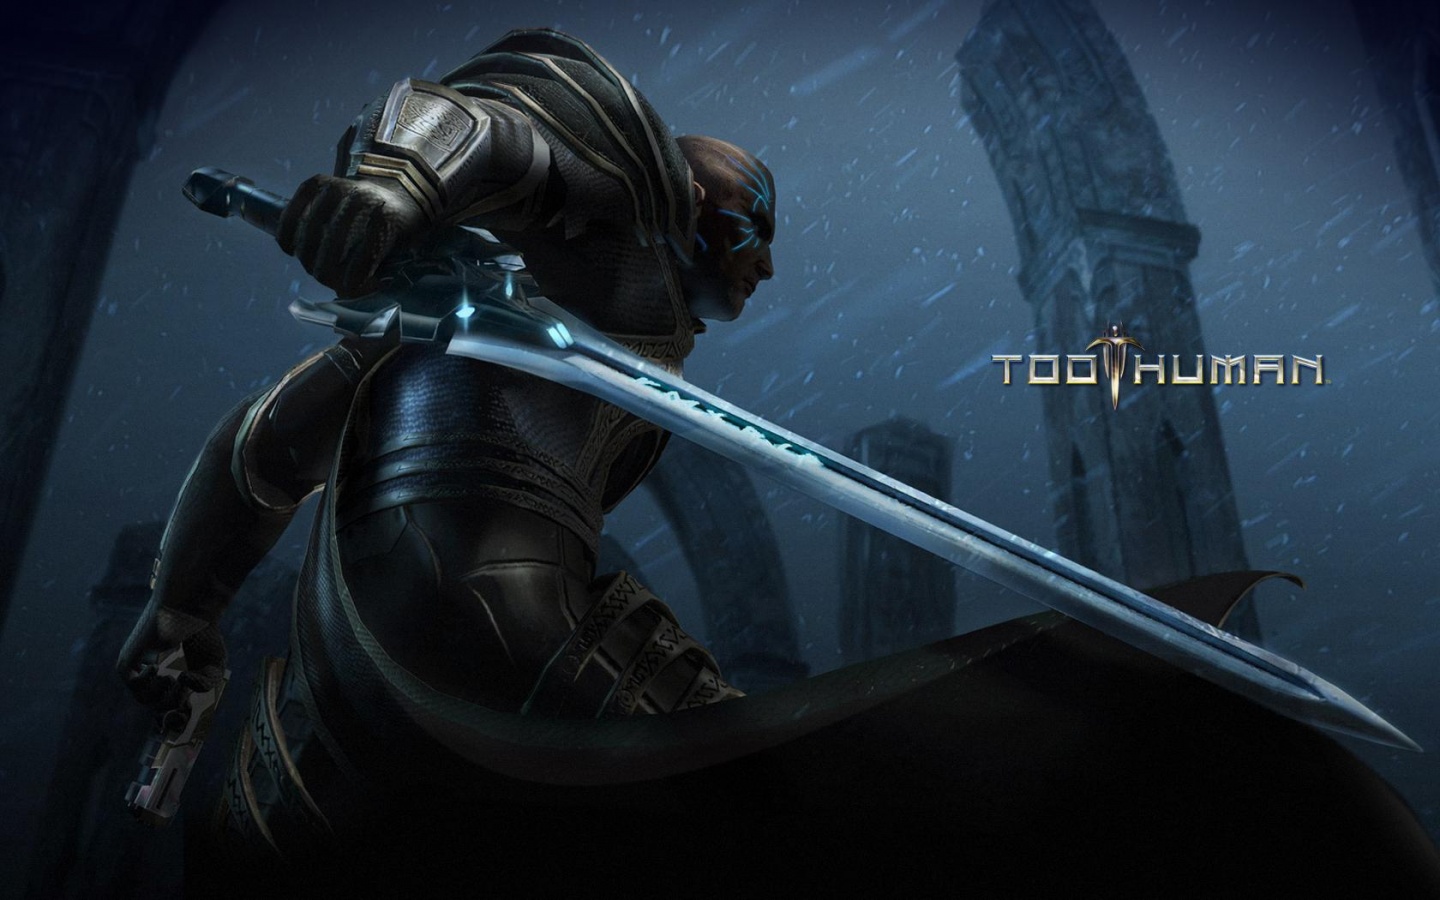 Too Human Xbox Game HD Wallpaper Res